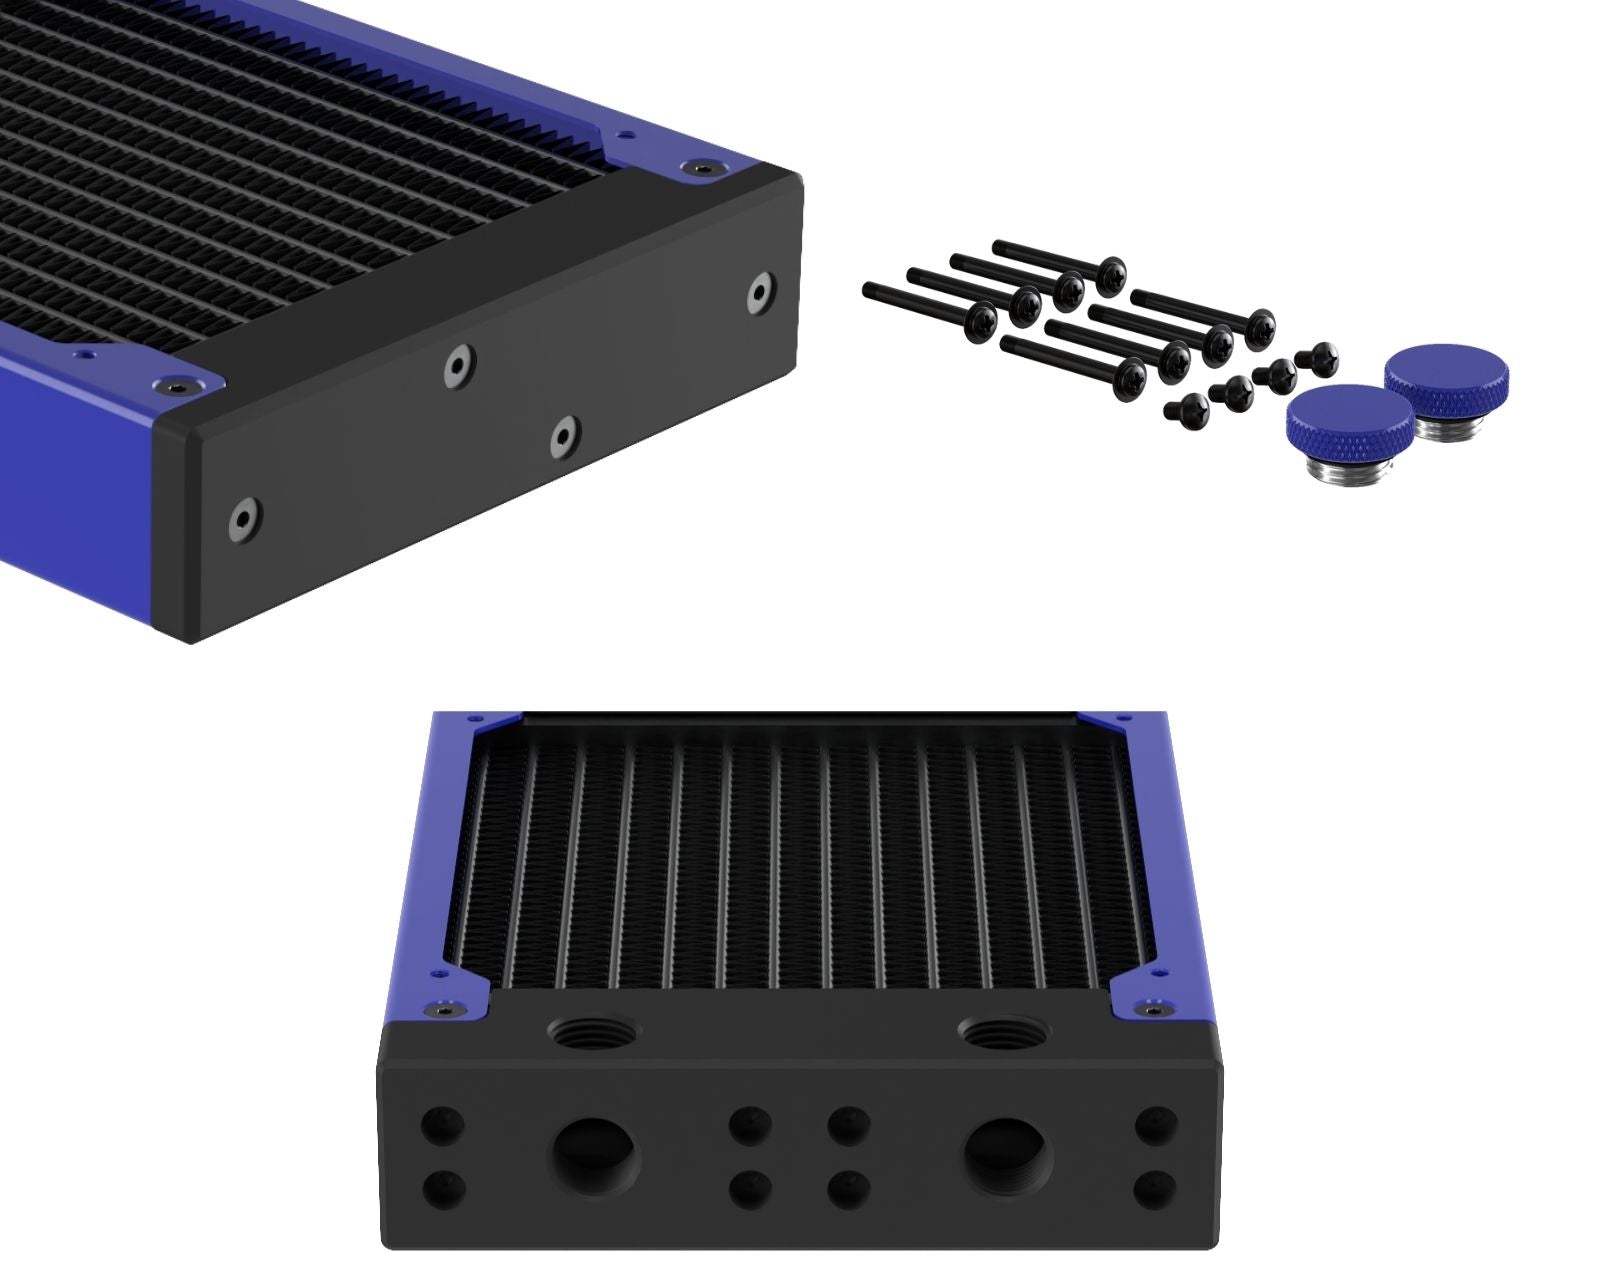 PrimoChill 240SL (30mm) EXIMO Modular Radiator, Black POM, 2x120mm, Dual Fan (R-SL-BK24) Available in 20+ Colors, Assembled in USA and Custom Watercooling Loop Ready - True Blue